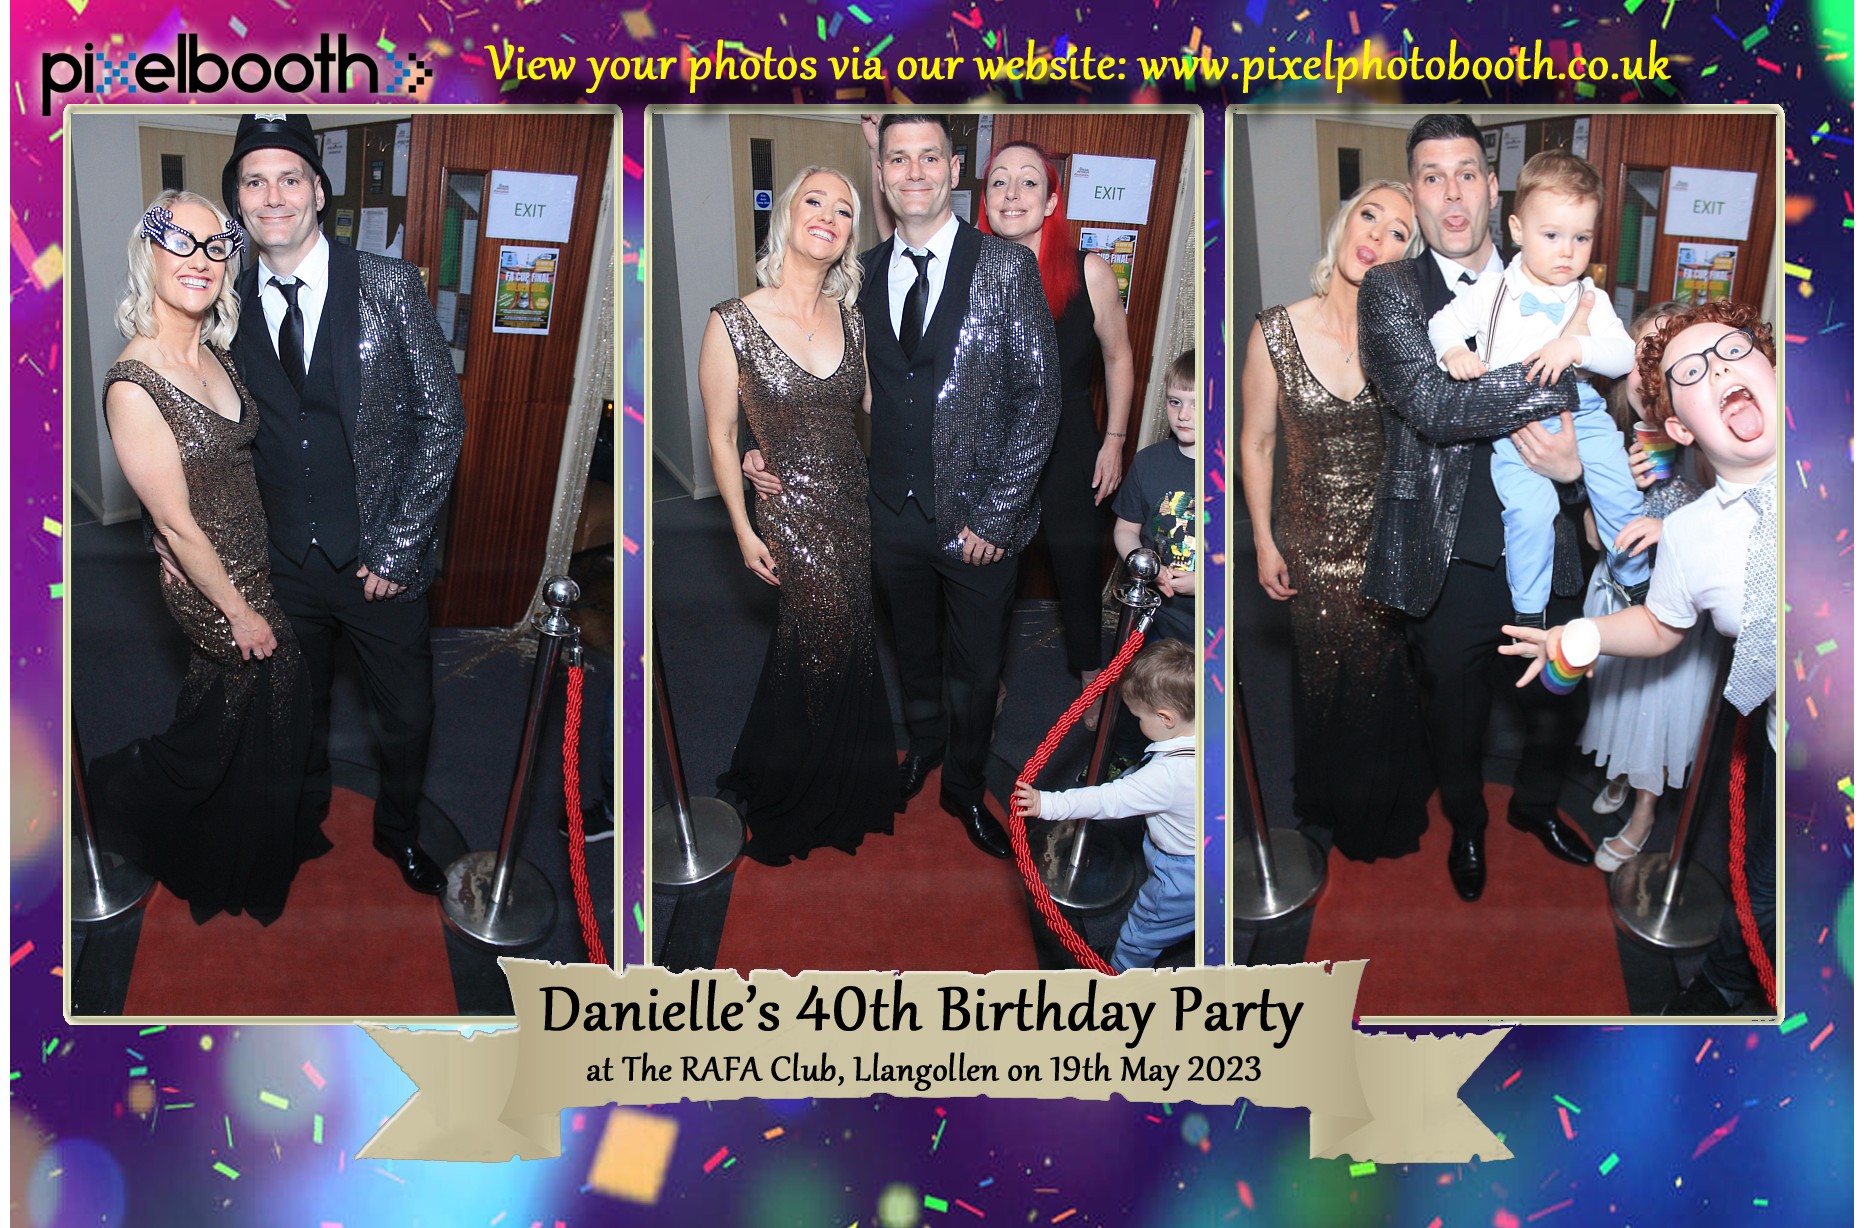 19th May 2023. 40th Birthday for Danielle